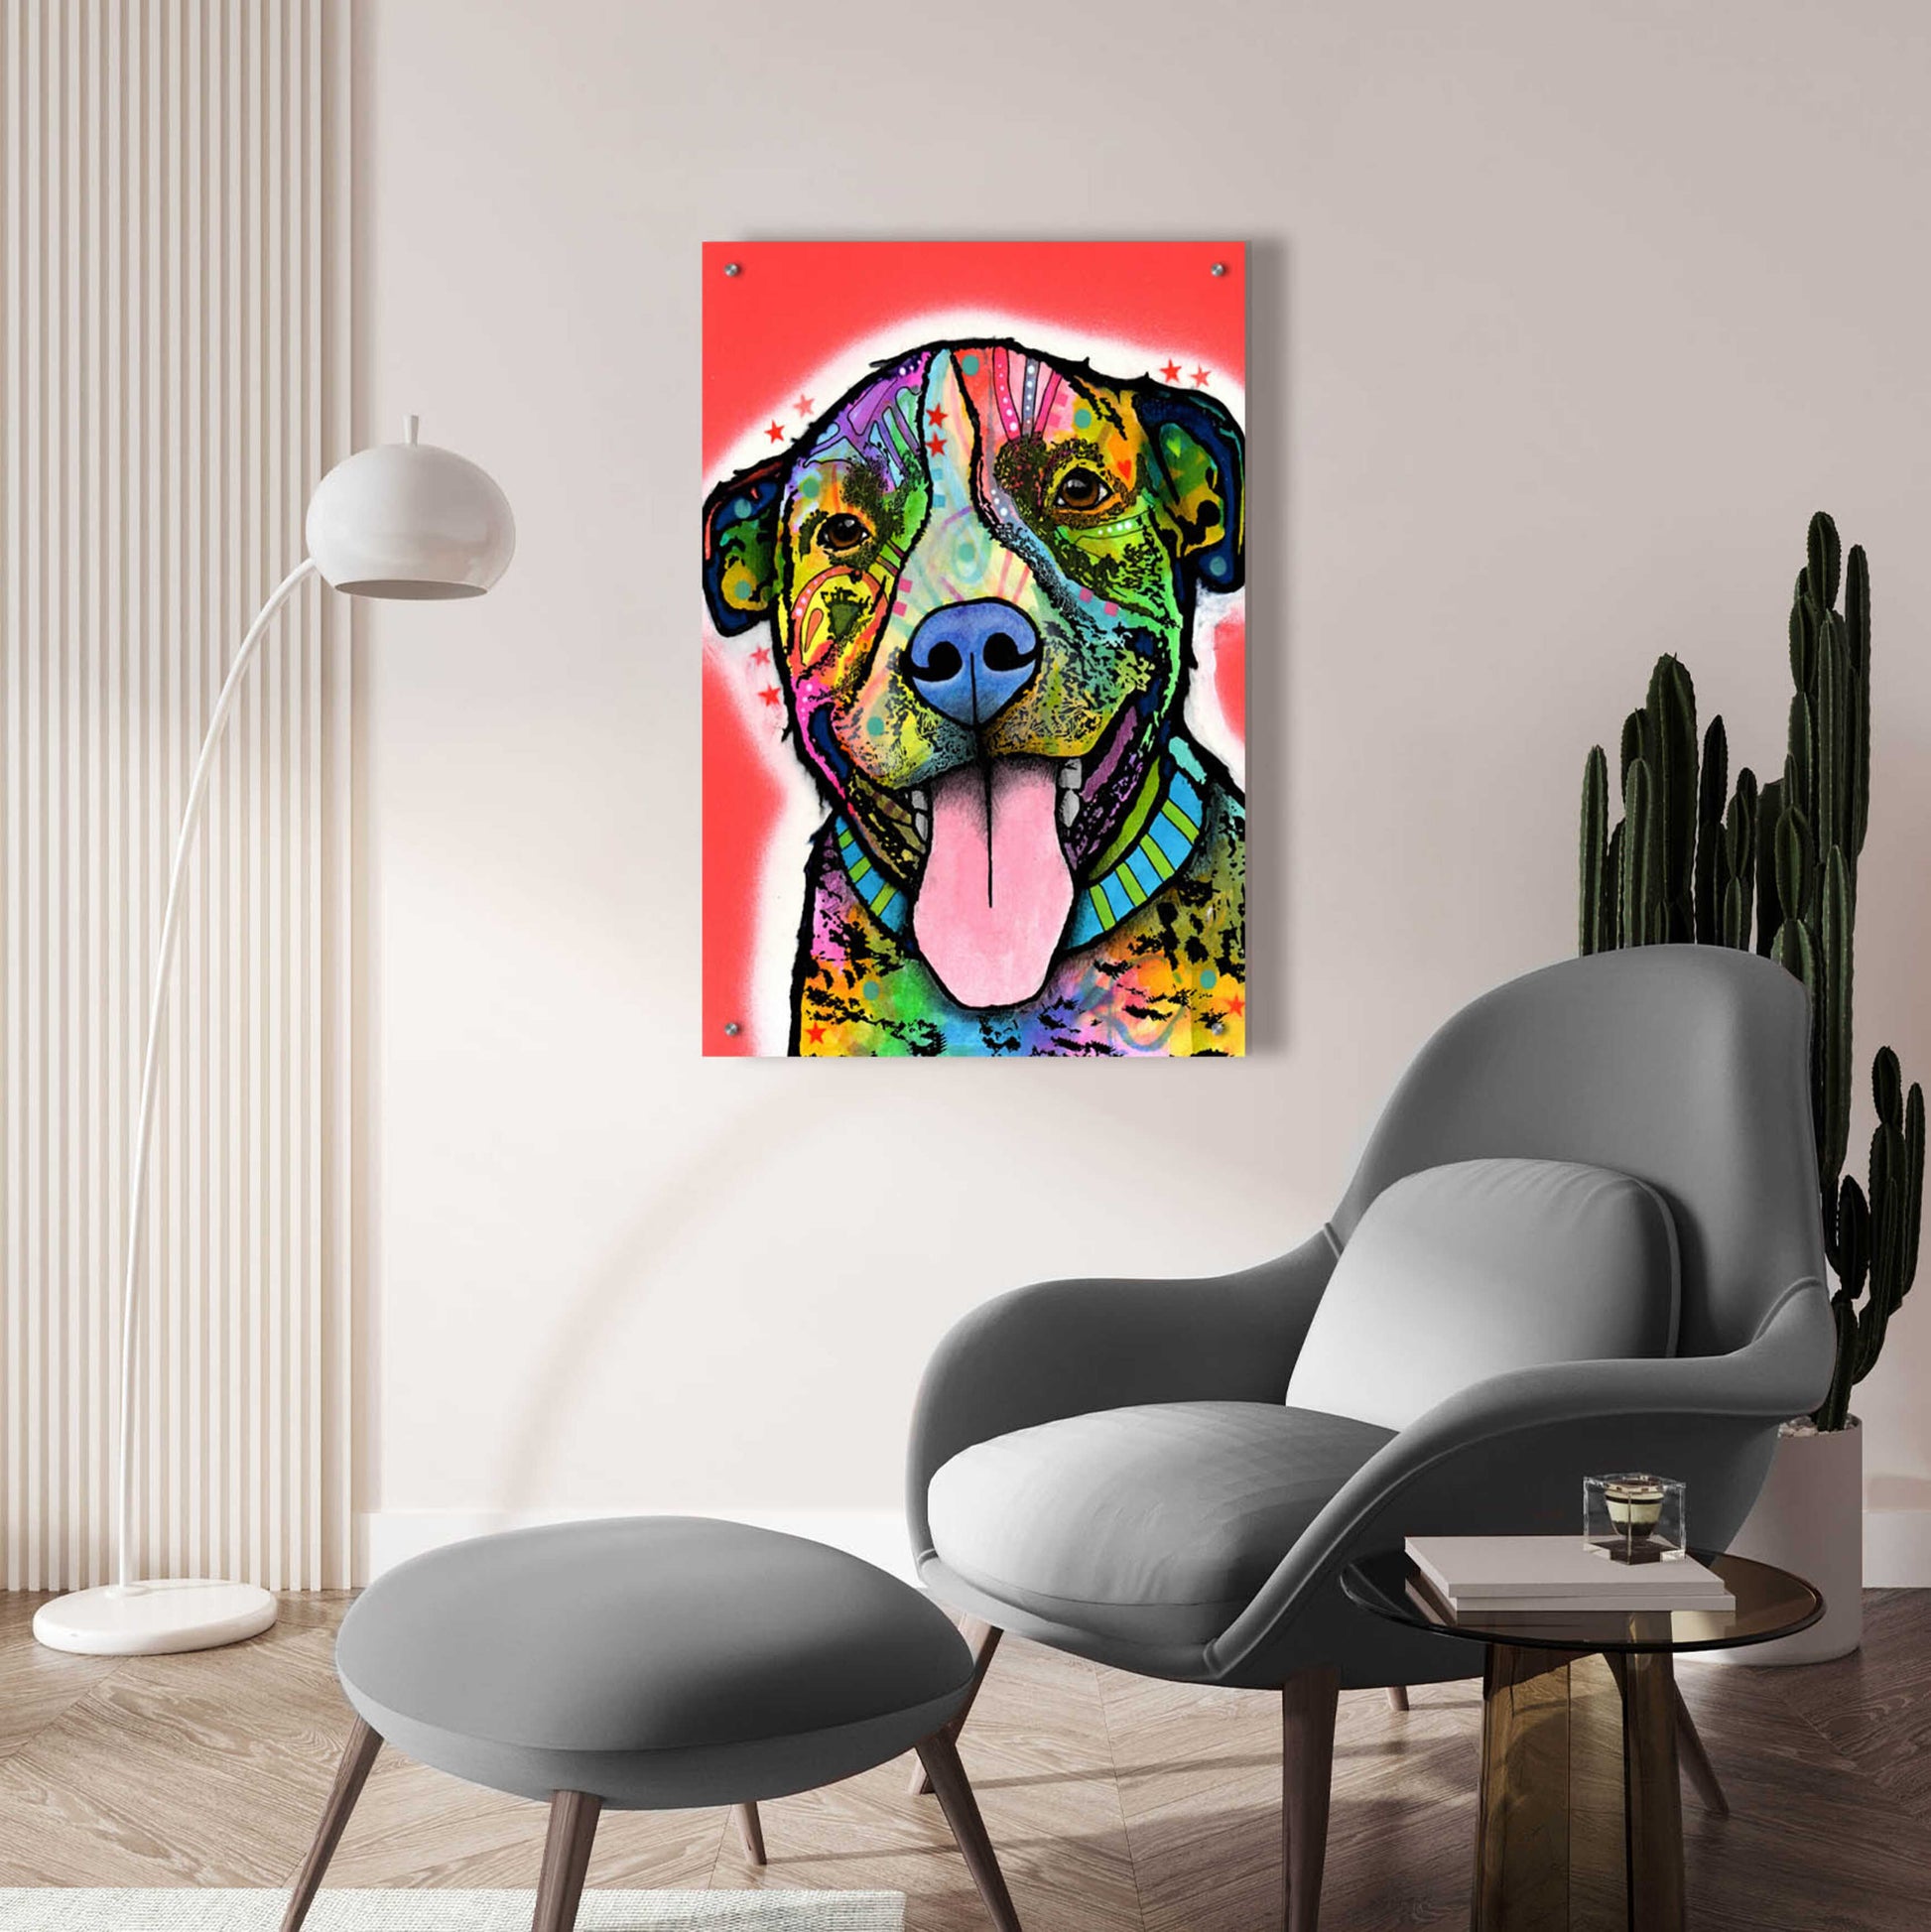 Epic Art 'Smiling Pit Bull zoey' by Dean Russo, Acrylic Glass Wall Art,24x36